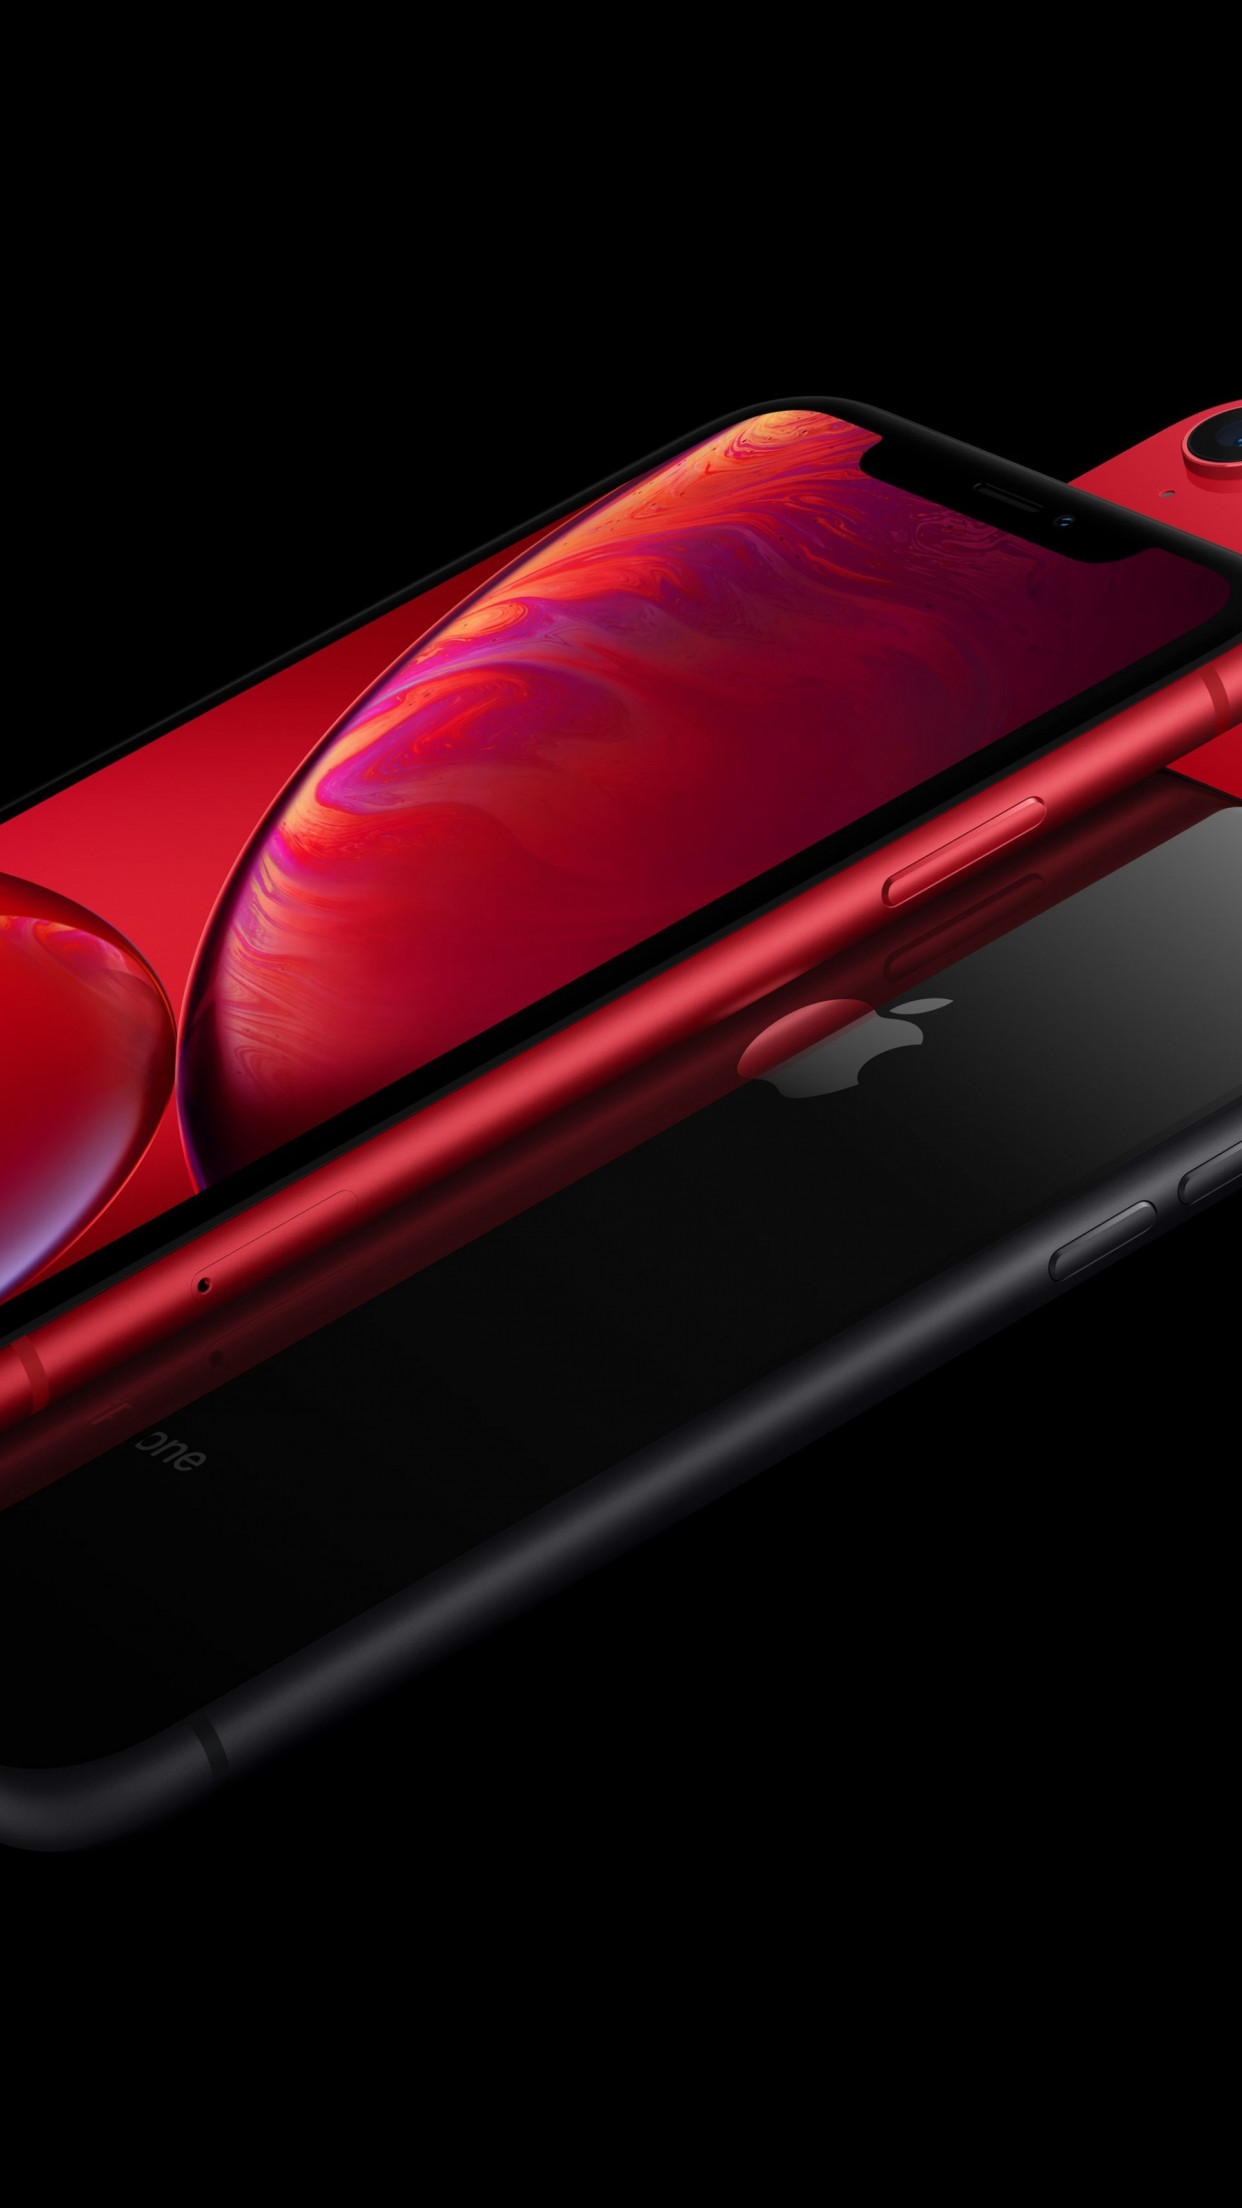 Download wallpaper: iPhone XR red 1242x2208